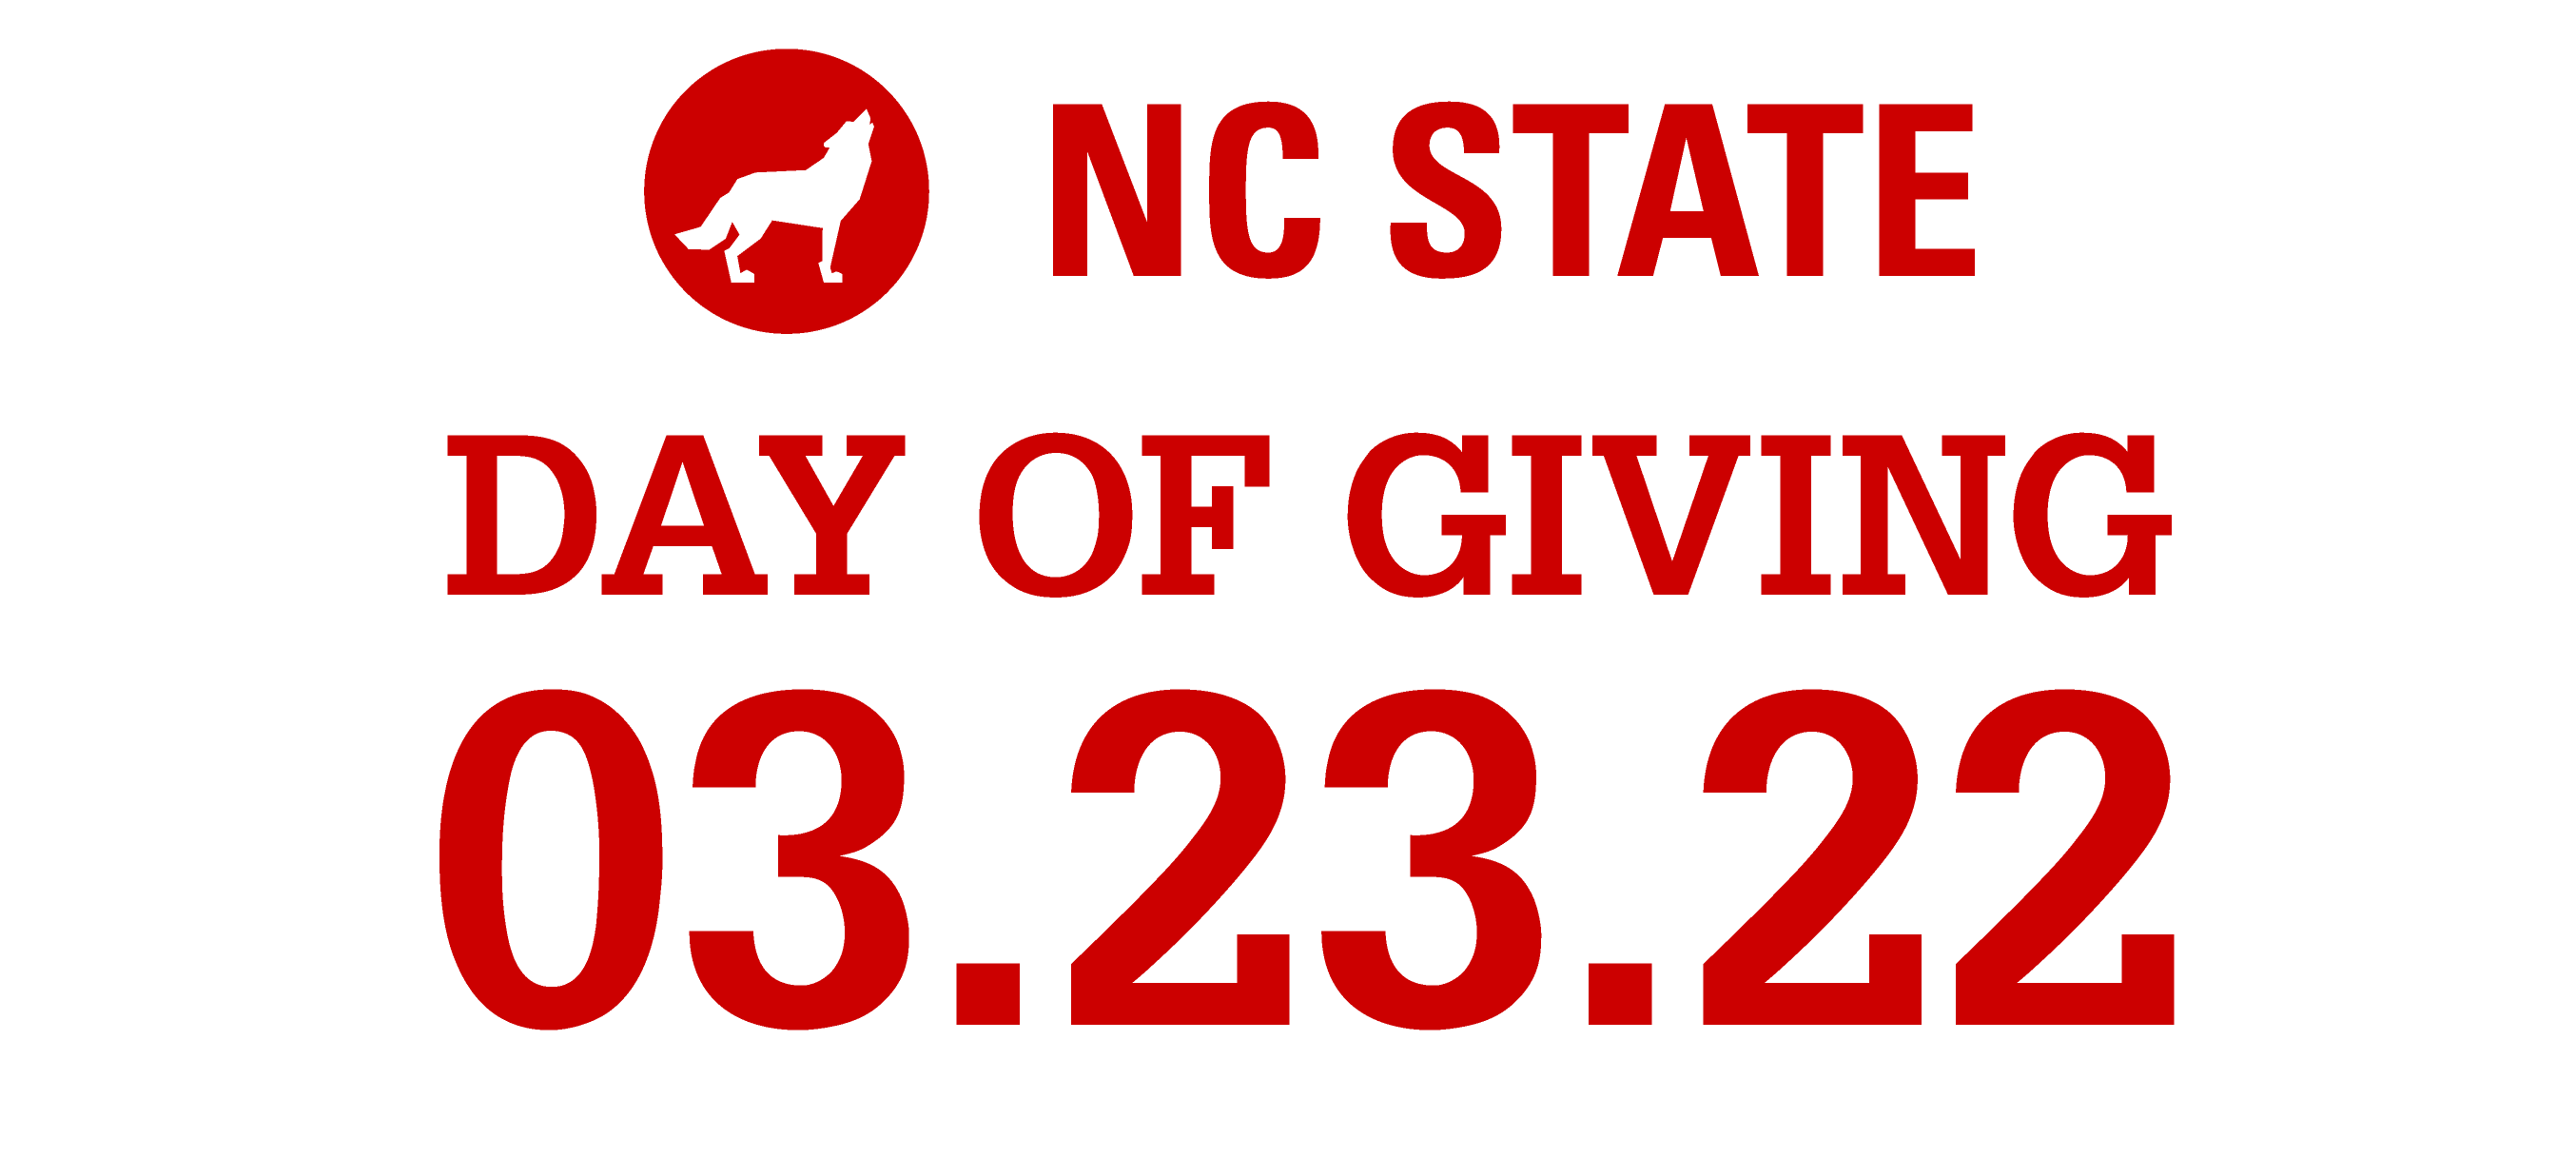 NC State Day of Giving
03.23.22